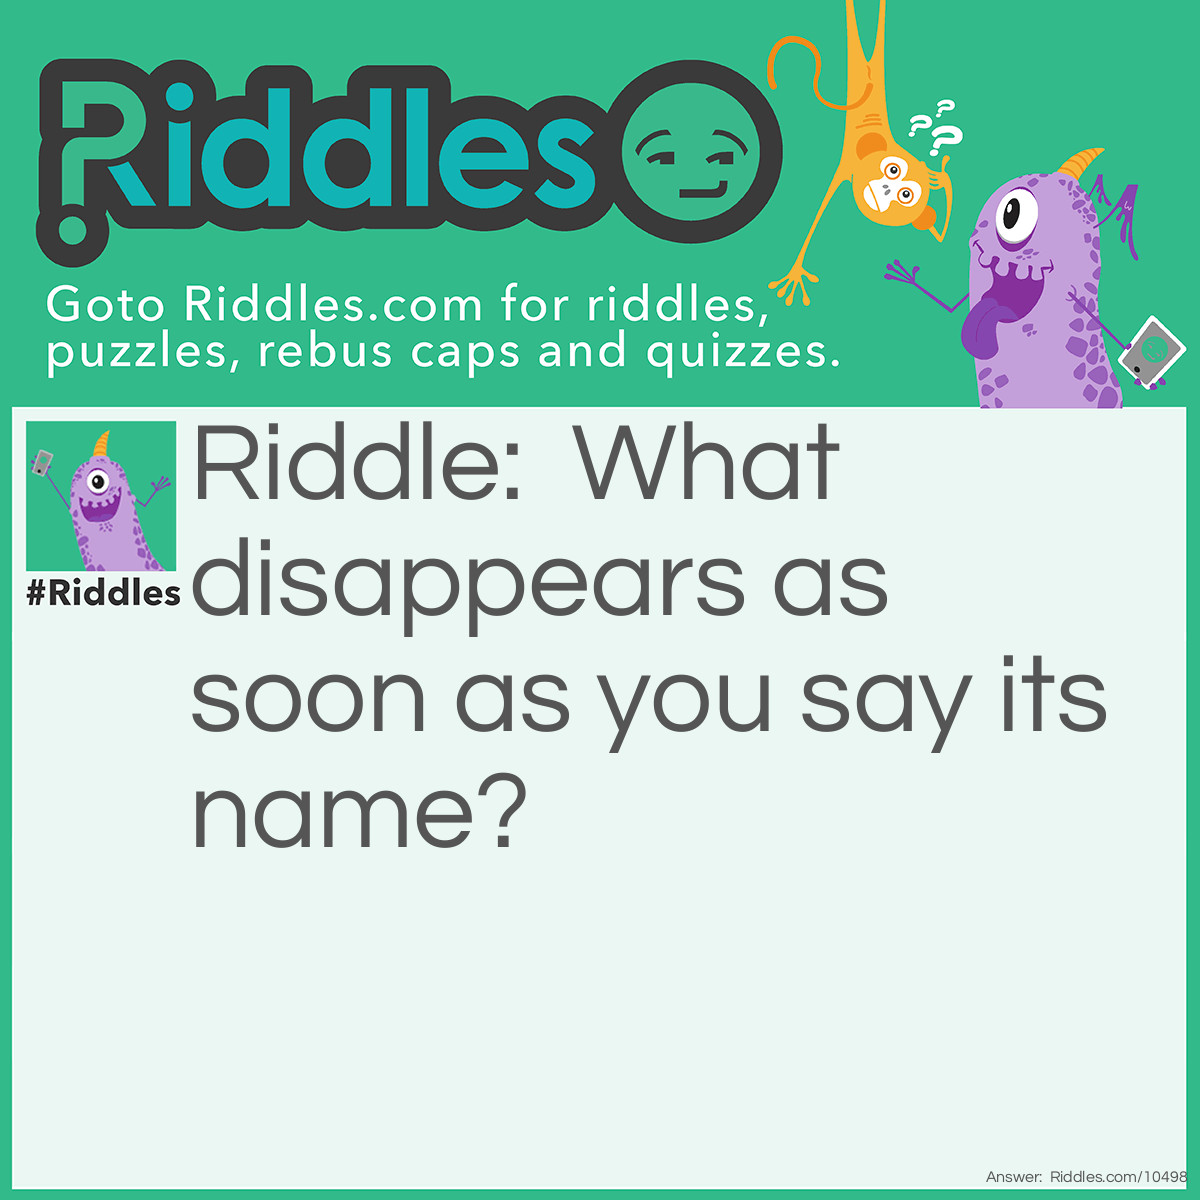 Riddle: What disappears as soon as you say its name? Answer: Silence.